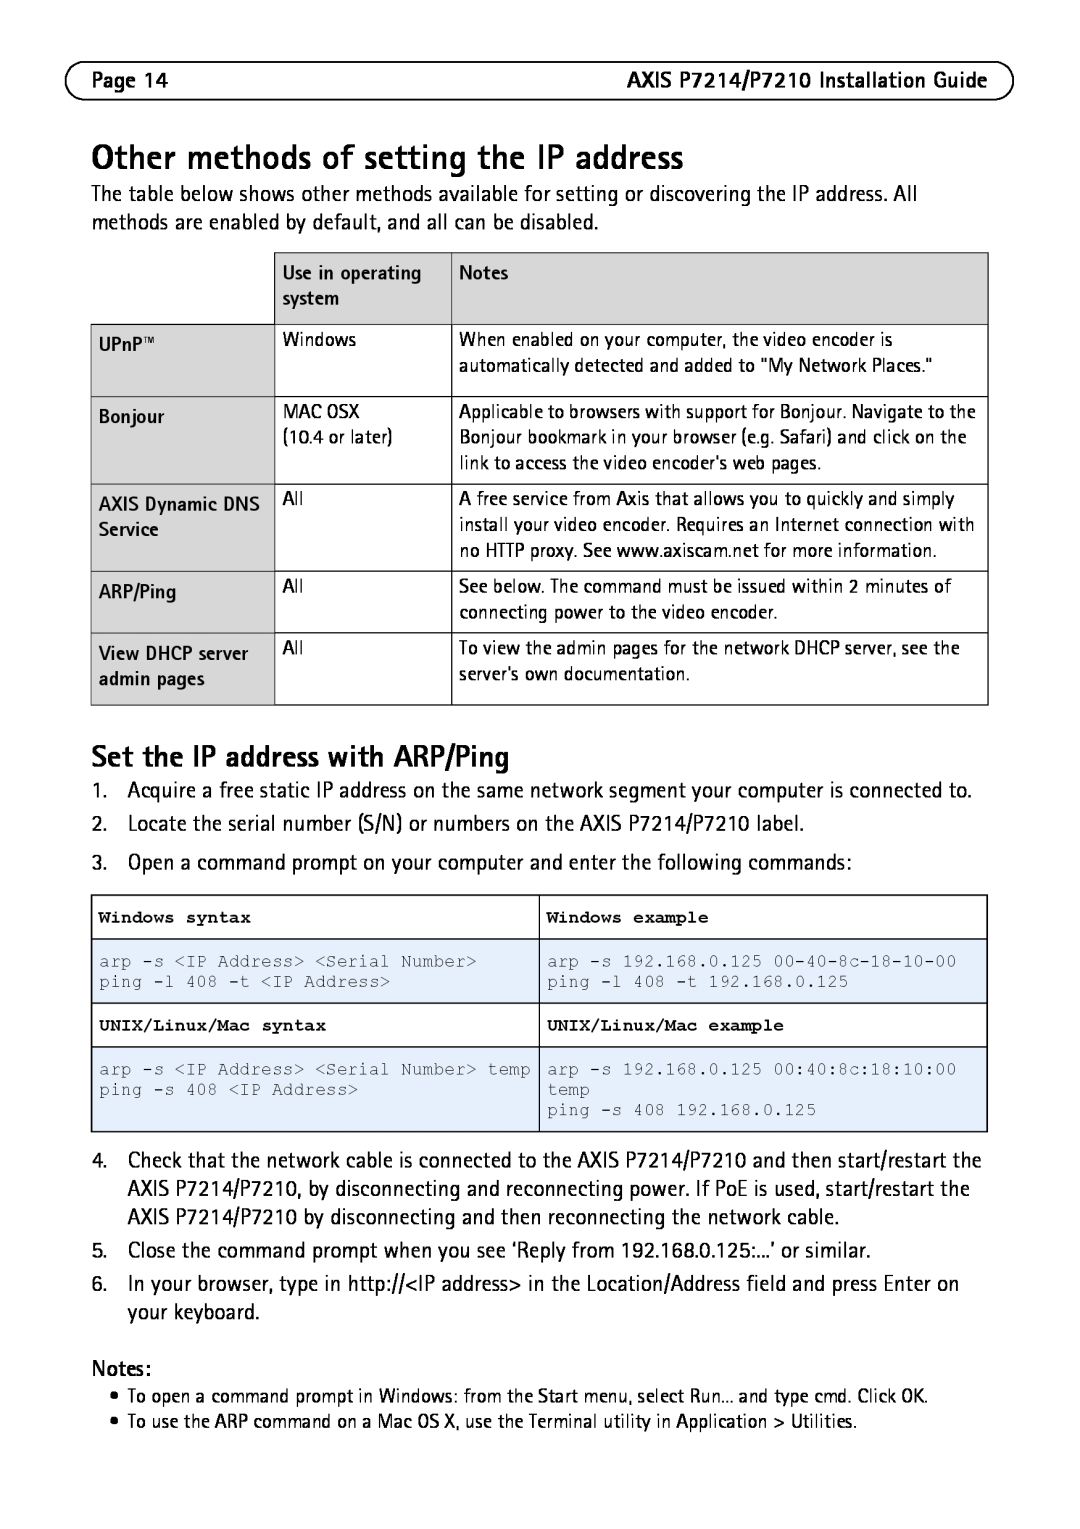 Axis Communications P7214/P7210 manual Other methods of setting the IP address, Set the IP address with ARP/Ping, Page 